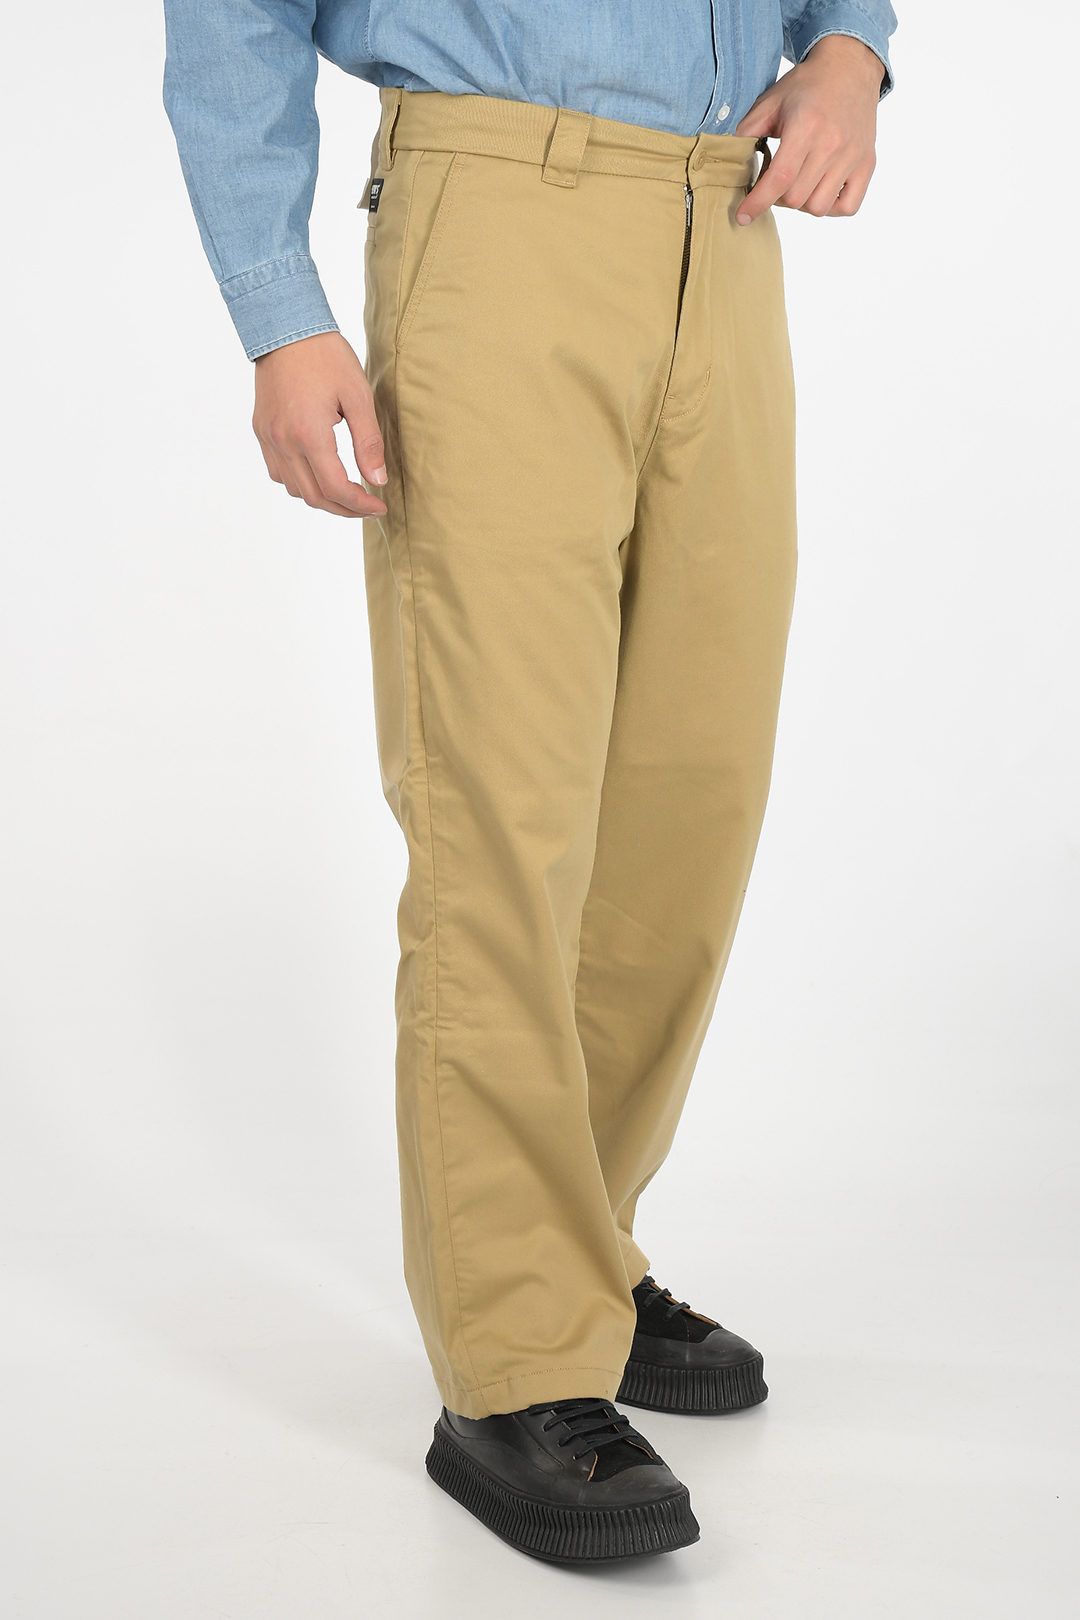 Levi's jetted pocket relaxed fit chinos men - Glamood Outlet